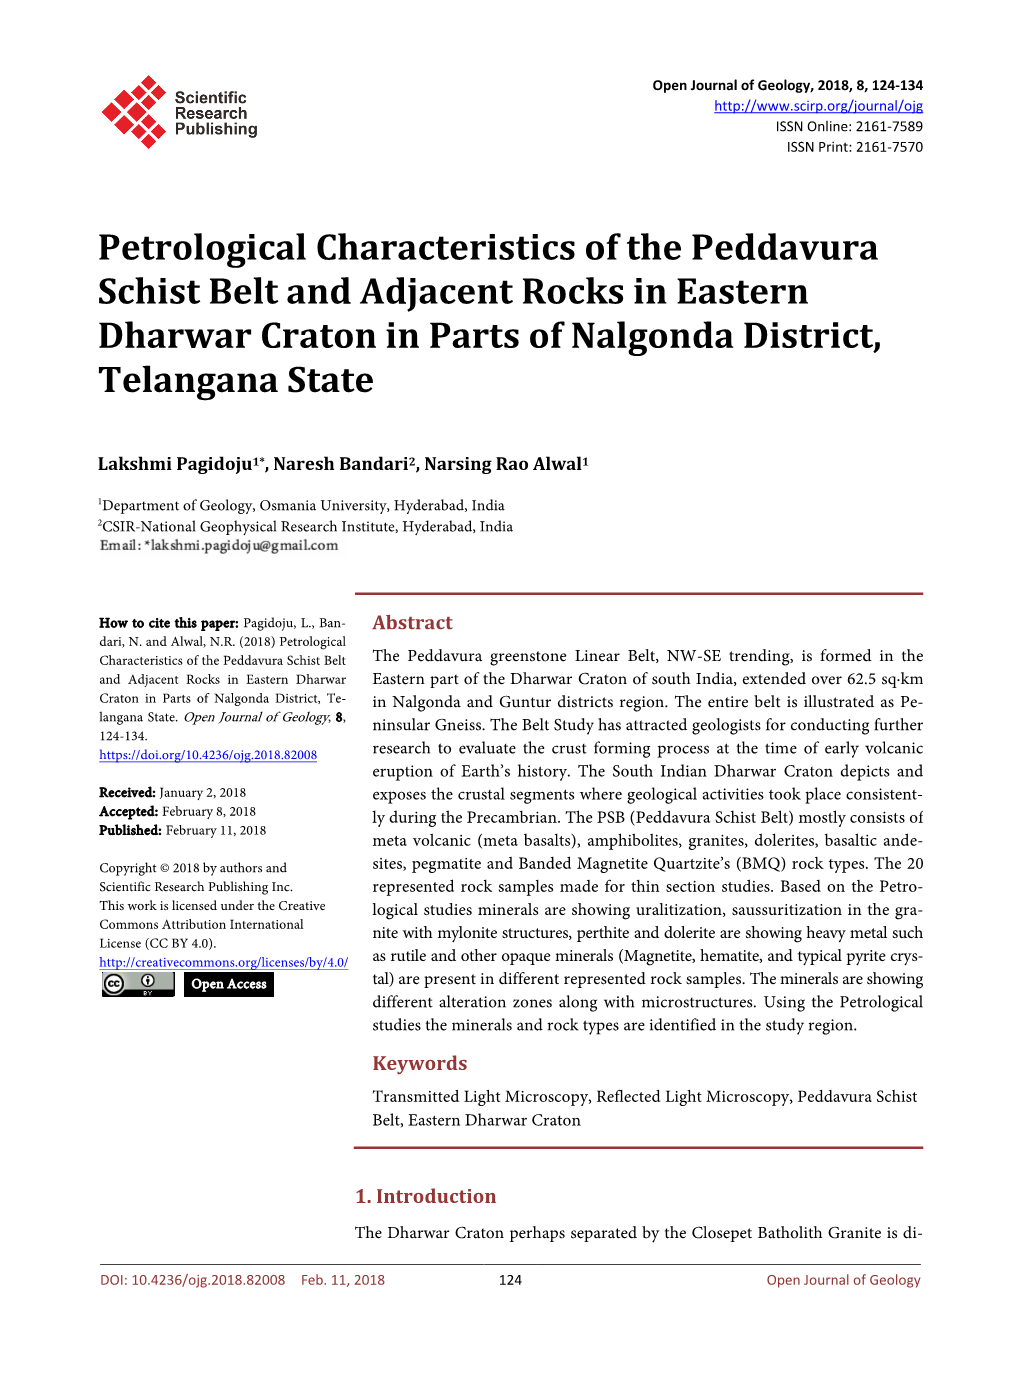 Petrological Characteristics of the Peddavura Schist Belt and Adjacent Rocks in Eastern Dharwar Craton in Parts of Nalgonda District, Telangana State